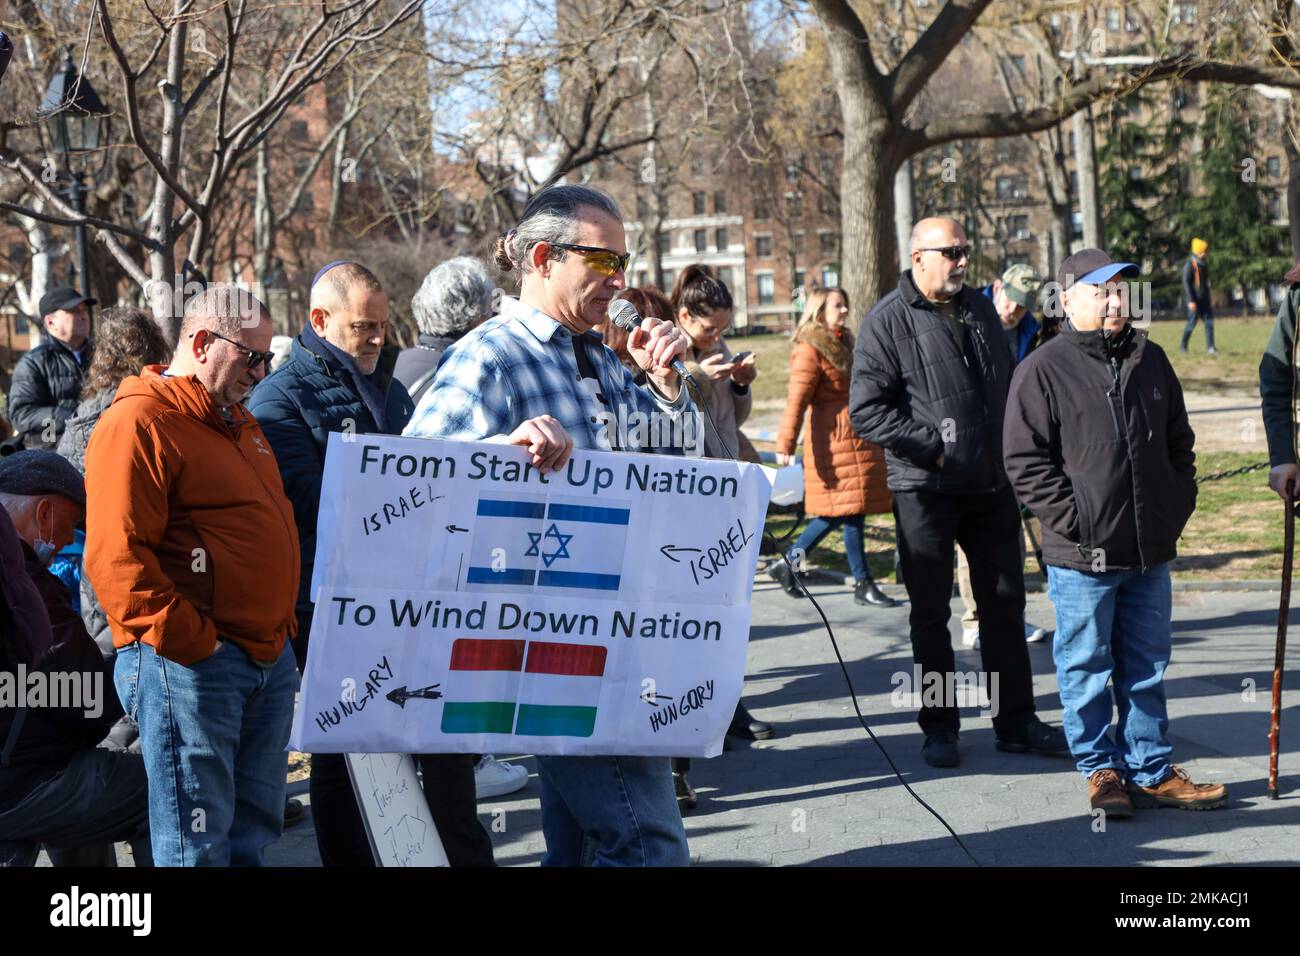 Protesters during an act in support of democracy in Israel in Washington Square Park on the island of Manhattan in New York in the United States this Saturday, 28. Credit: Brazil Photo Press/Alamy Live News Stock Photo